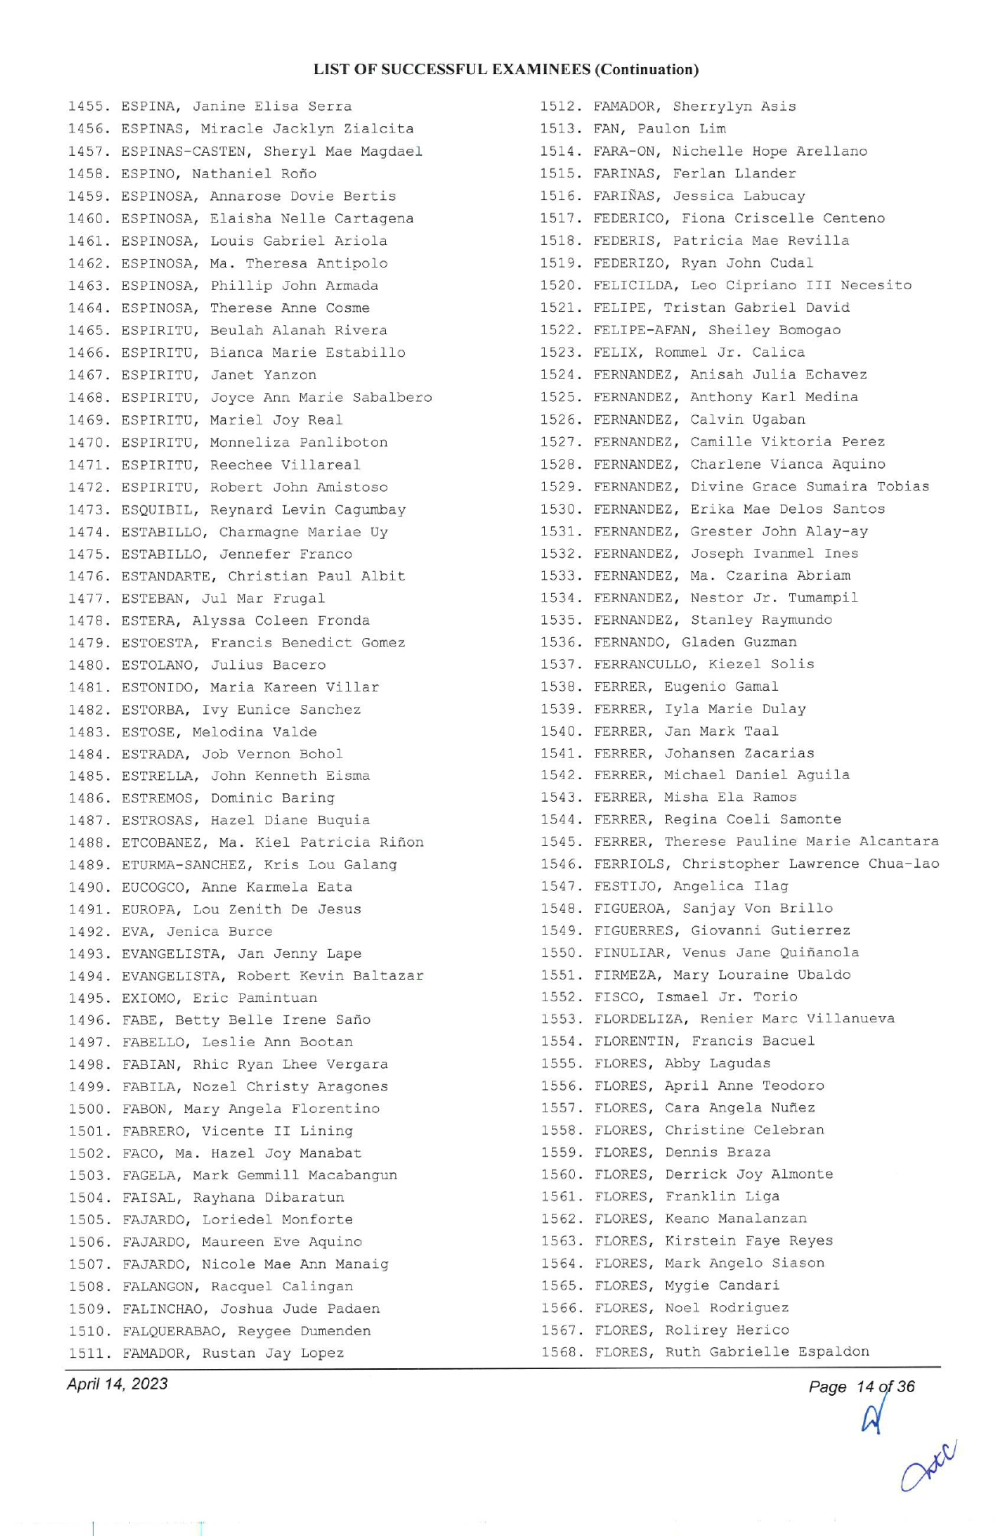 BAR EXAM RESULTS 2022 List of Passers and Topnotchers